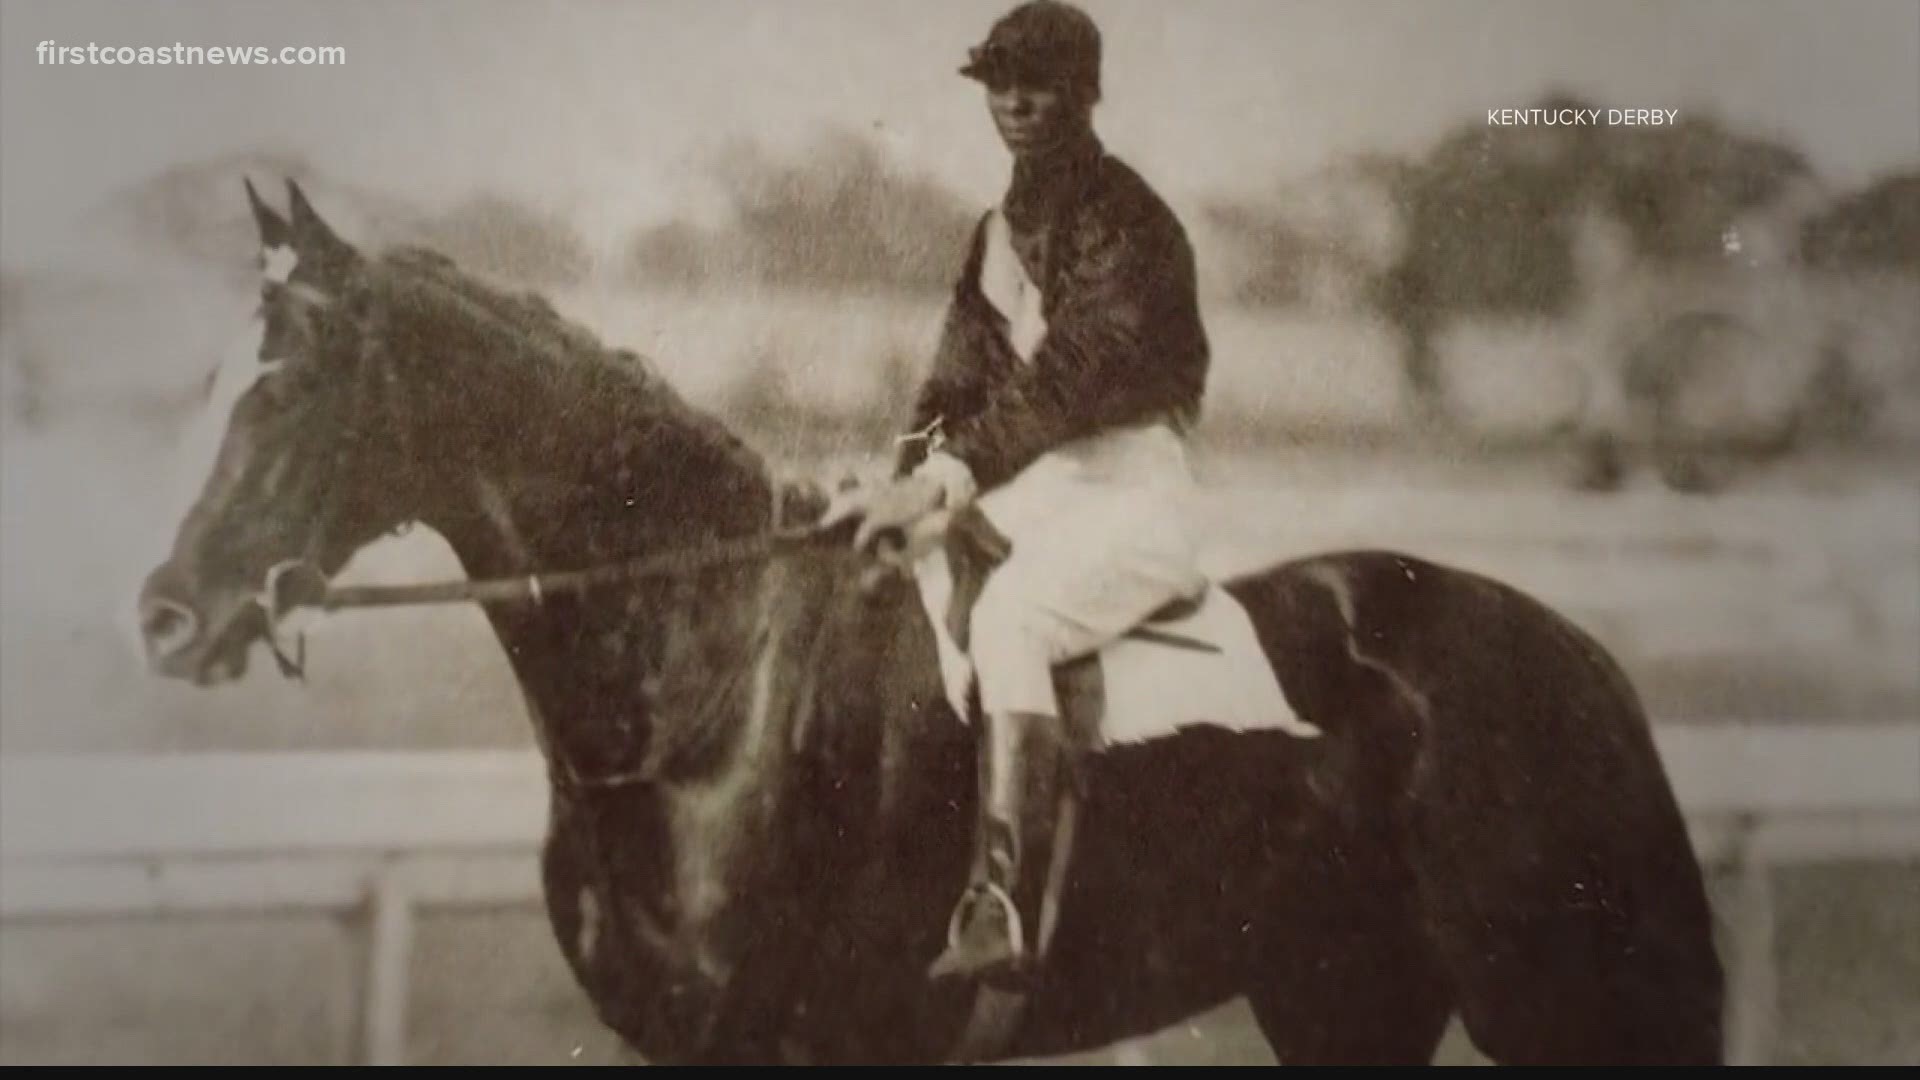 It's a history nearly forgotten. African Americans helped shape the thoroughbred racing industry. During the first Kentucky Derby, 13 out of 15 jockeys were Black.